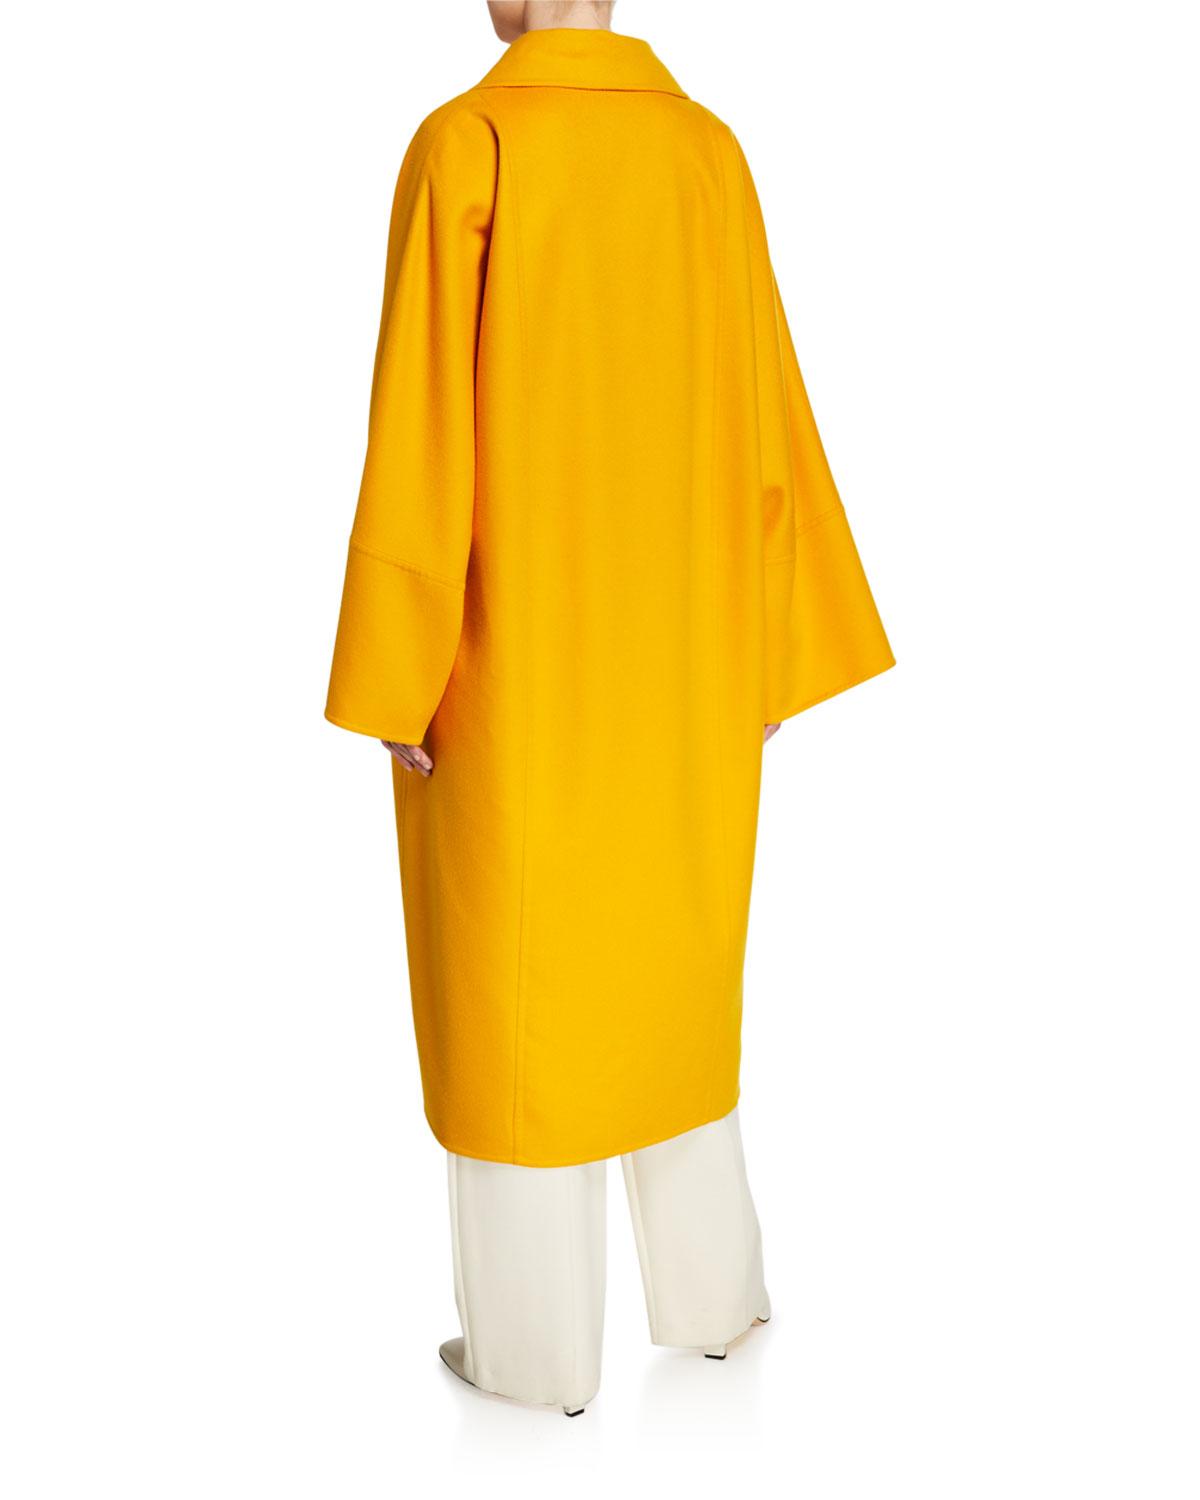 Loewe Oversized Wool Cashmere Coat in Yellow - Lyst